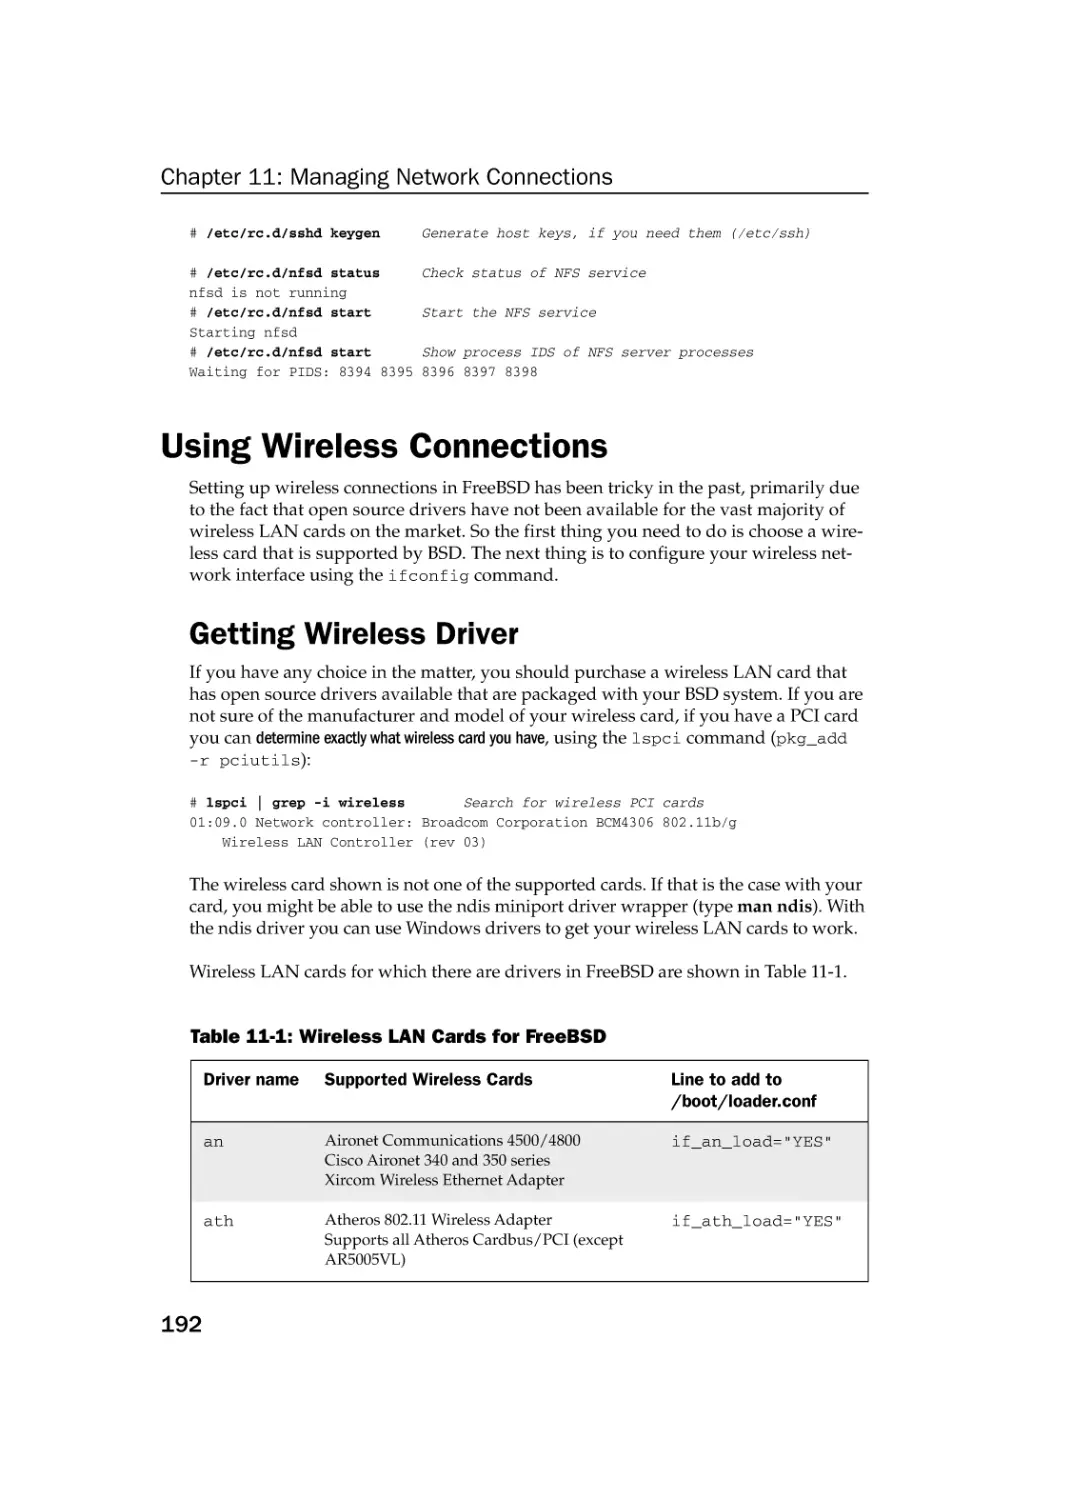 Using Wireless Connections